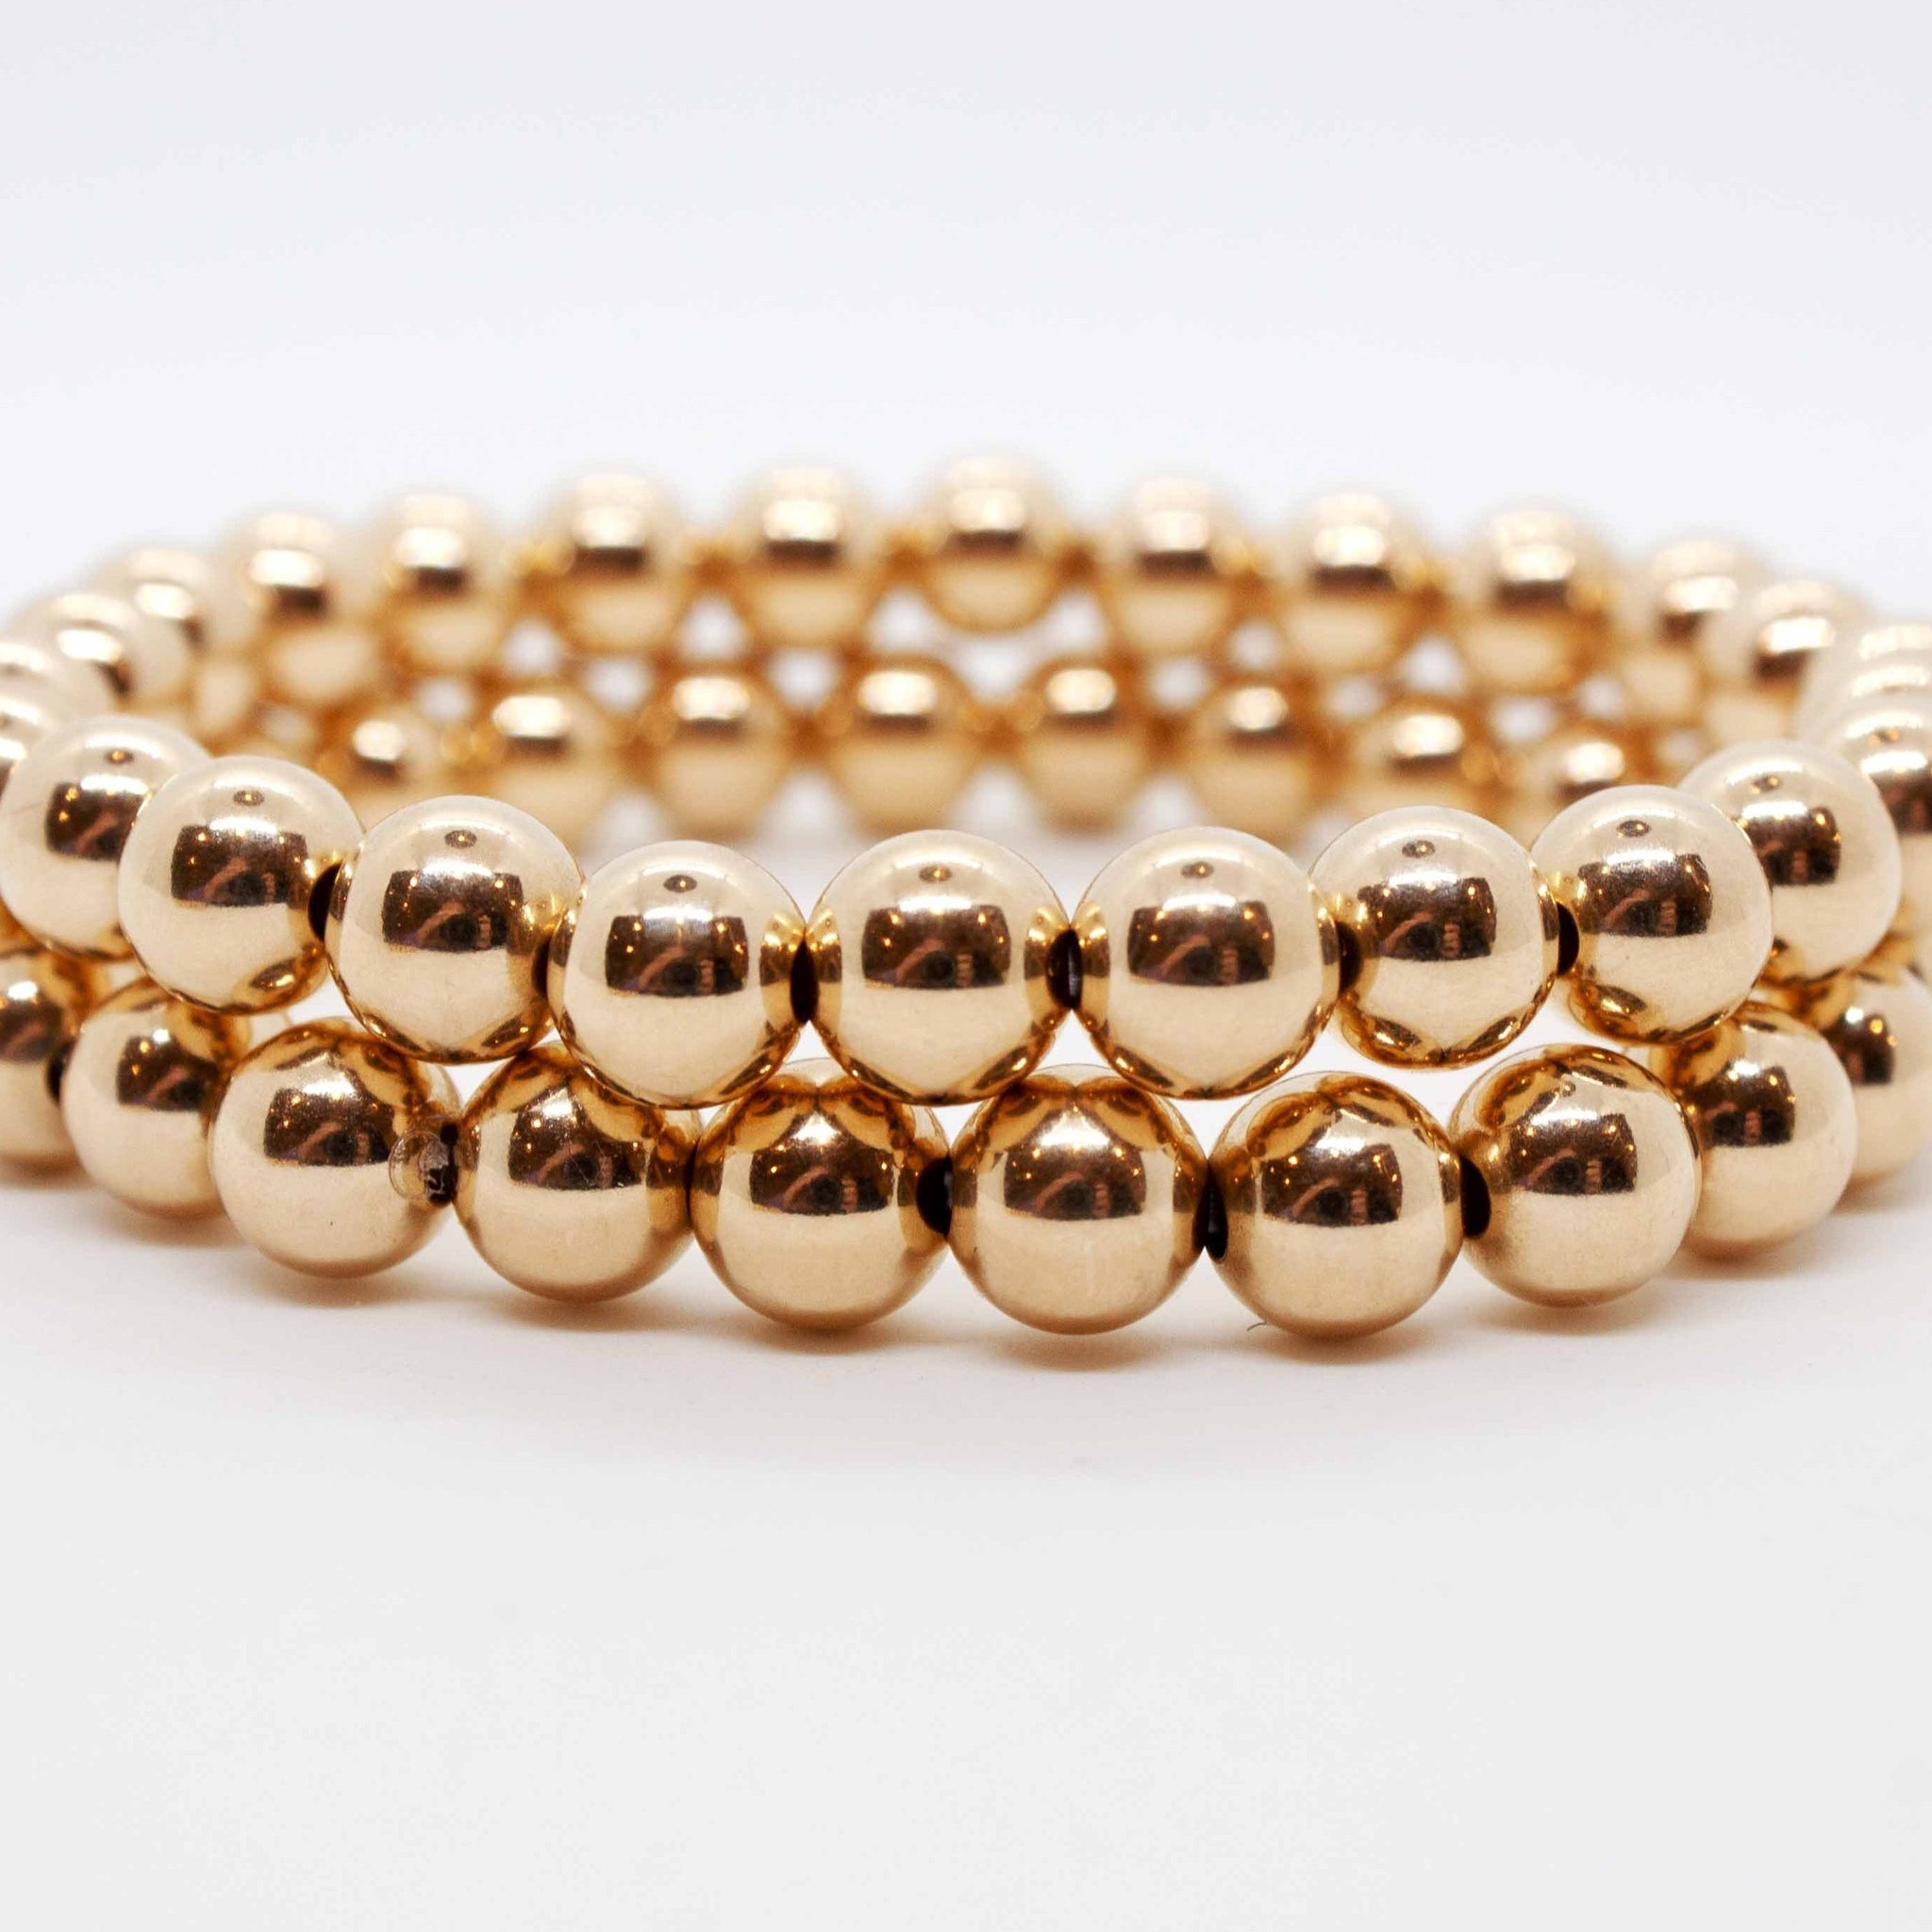 7 inch beaded gold stretchy stacking bracelet.